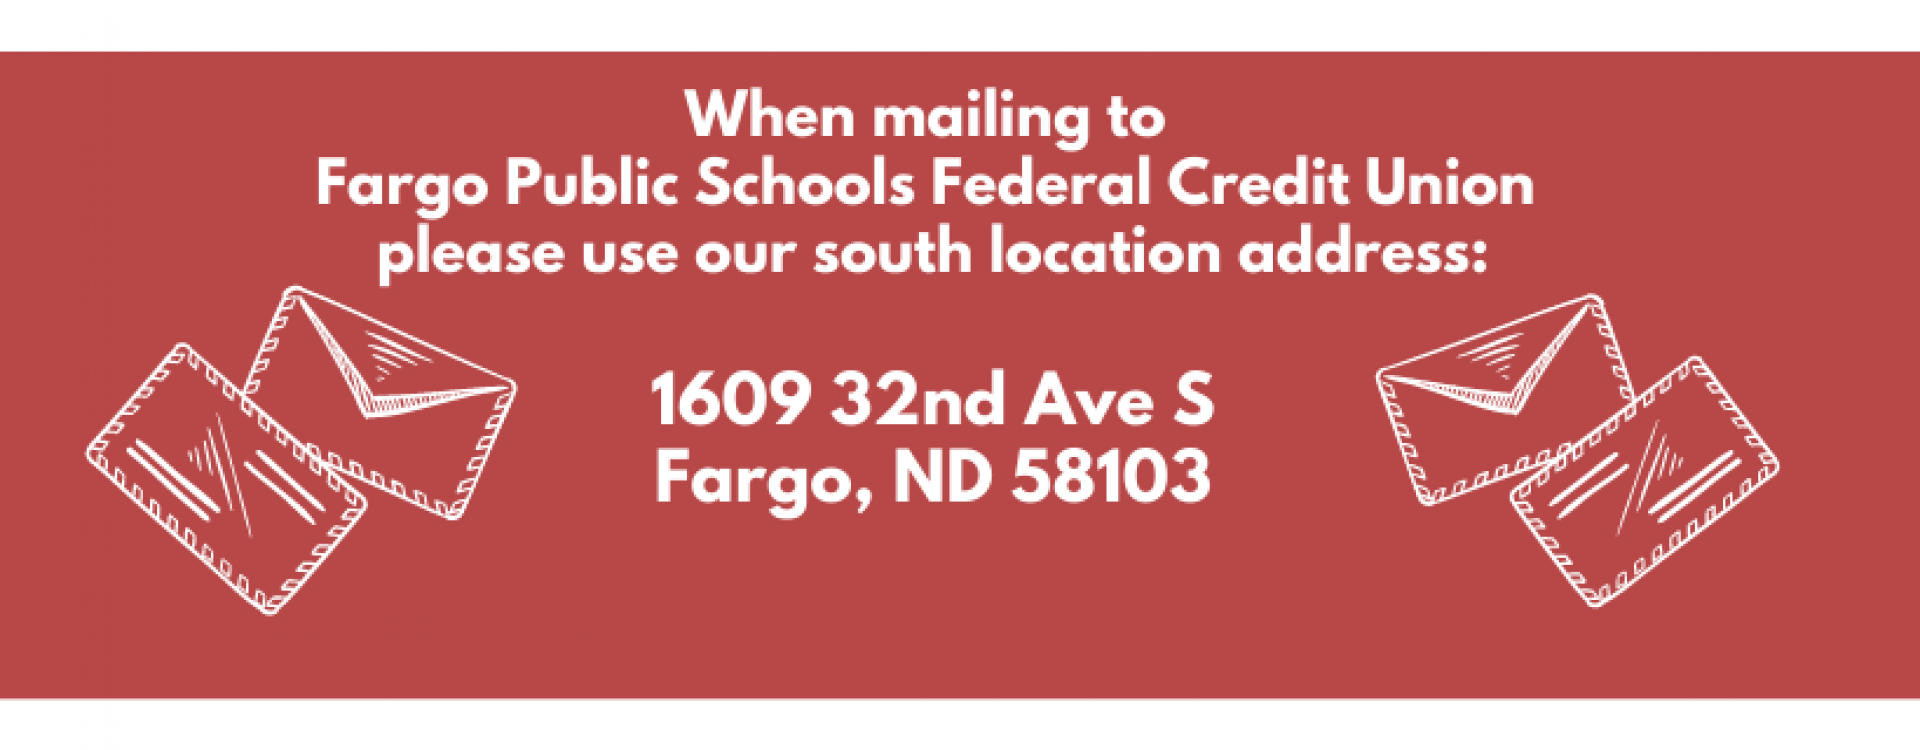 When mailing to FPSFCU please use our South location address: 1609 32nd Ave S